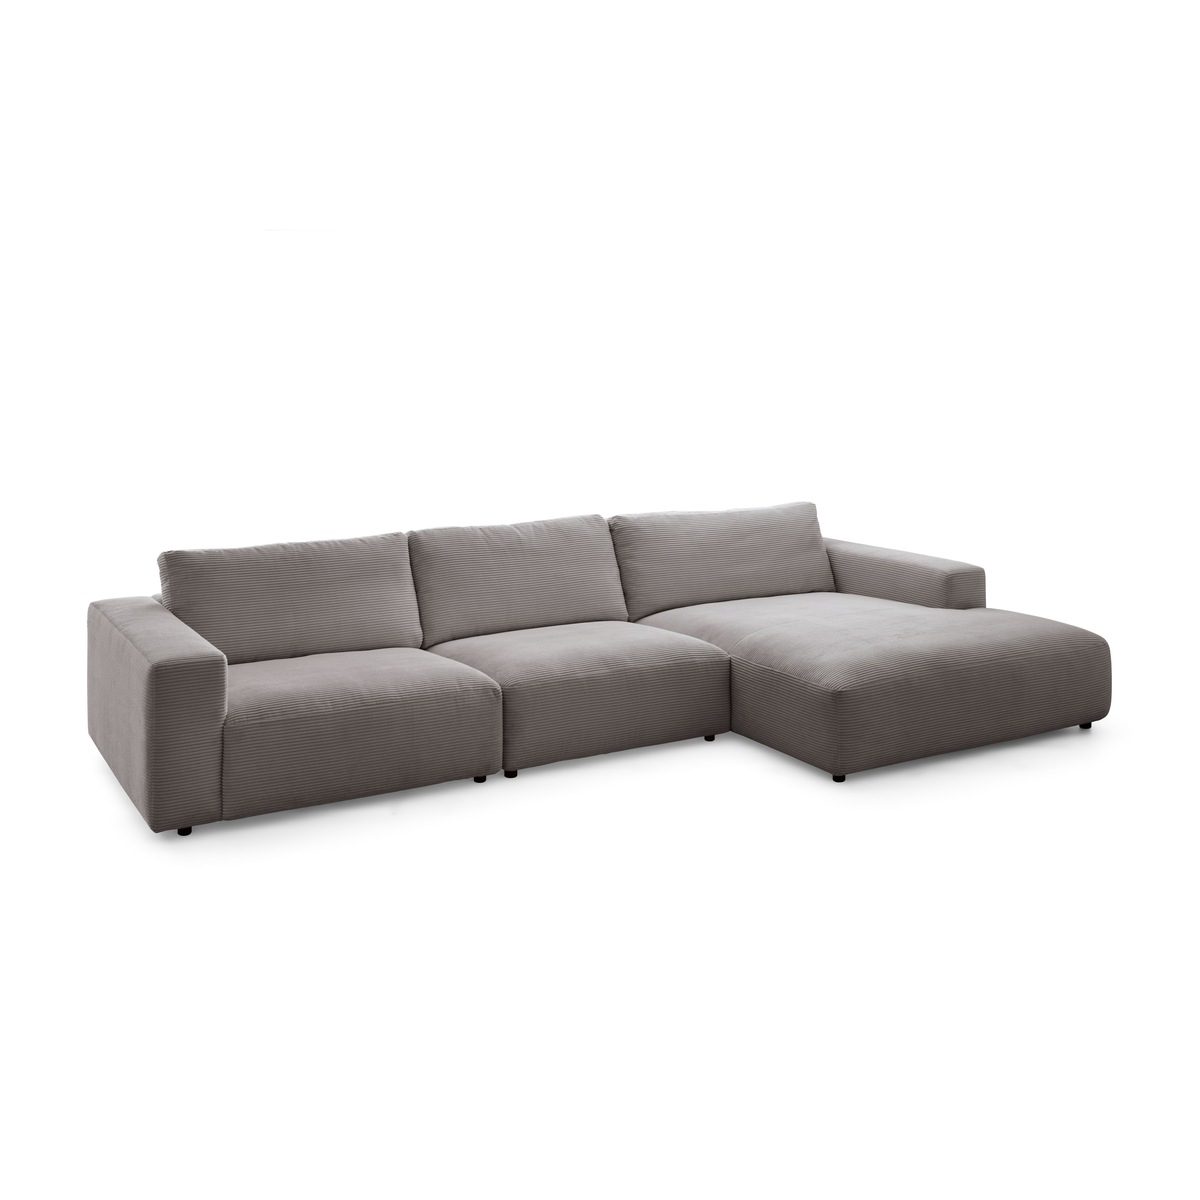 Lucia Cord Sofa branded Sitzer by M Gallery 3,5 Musterring